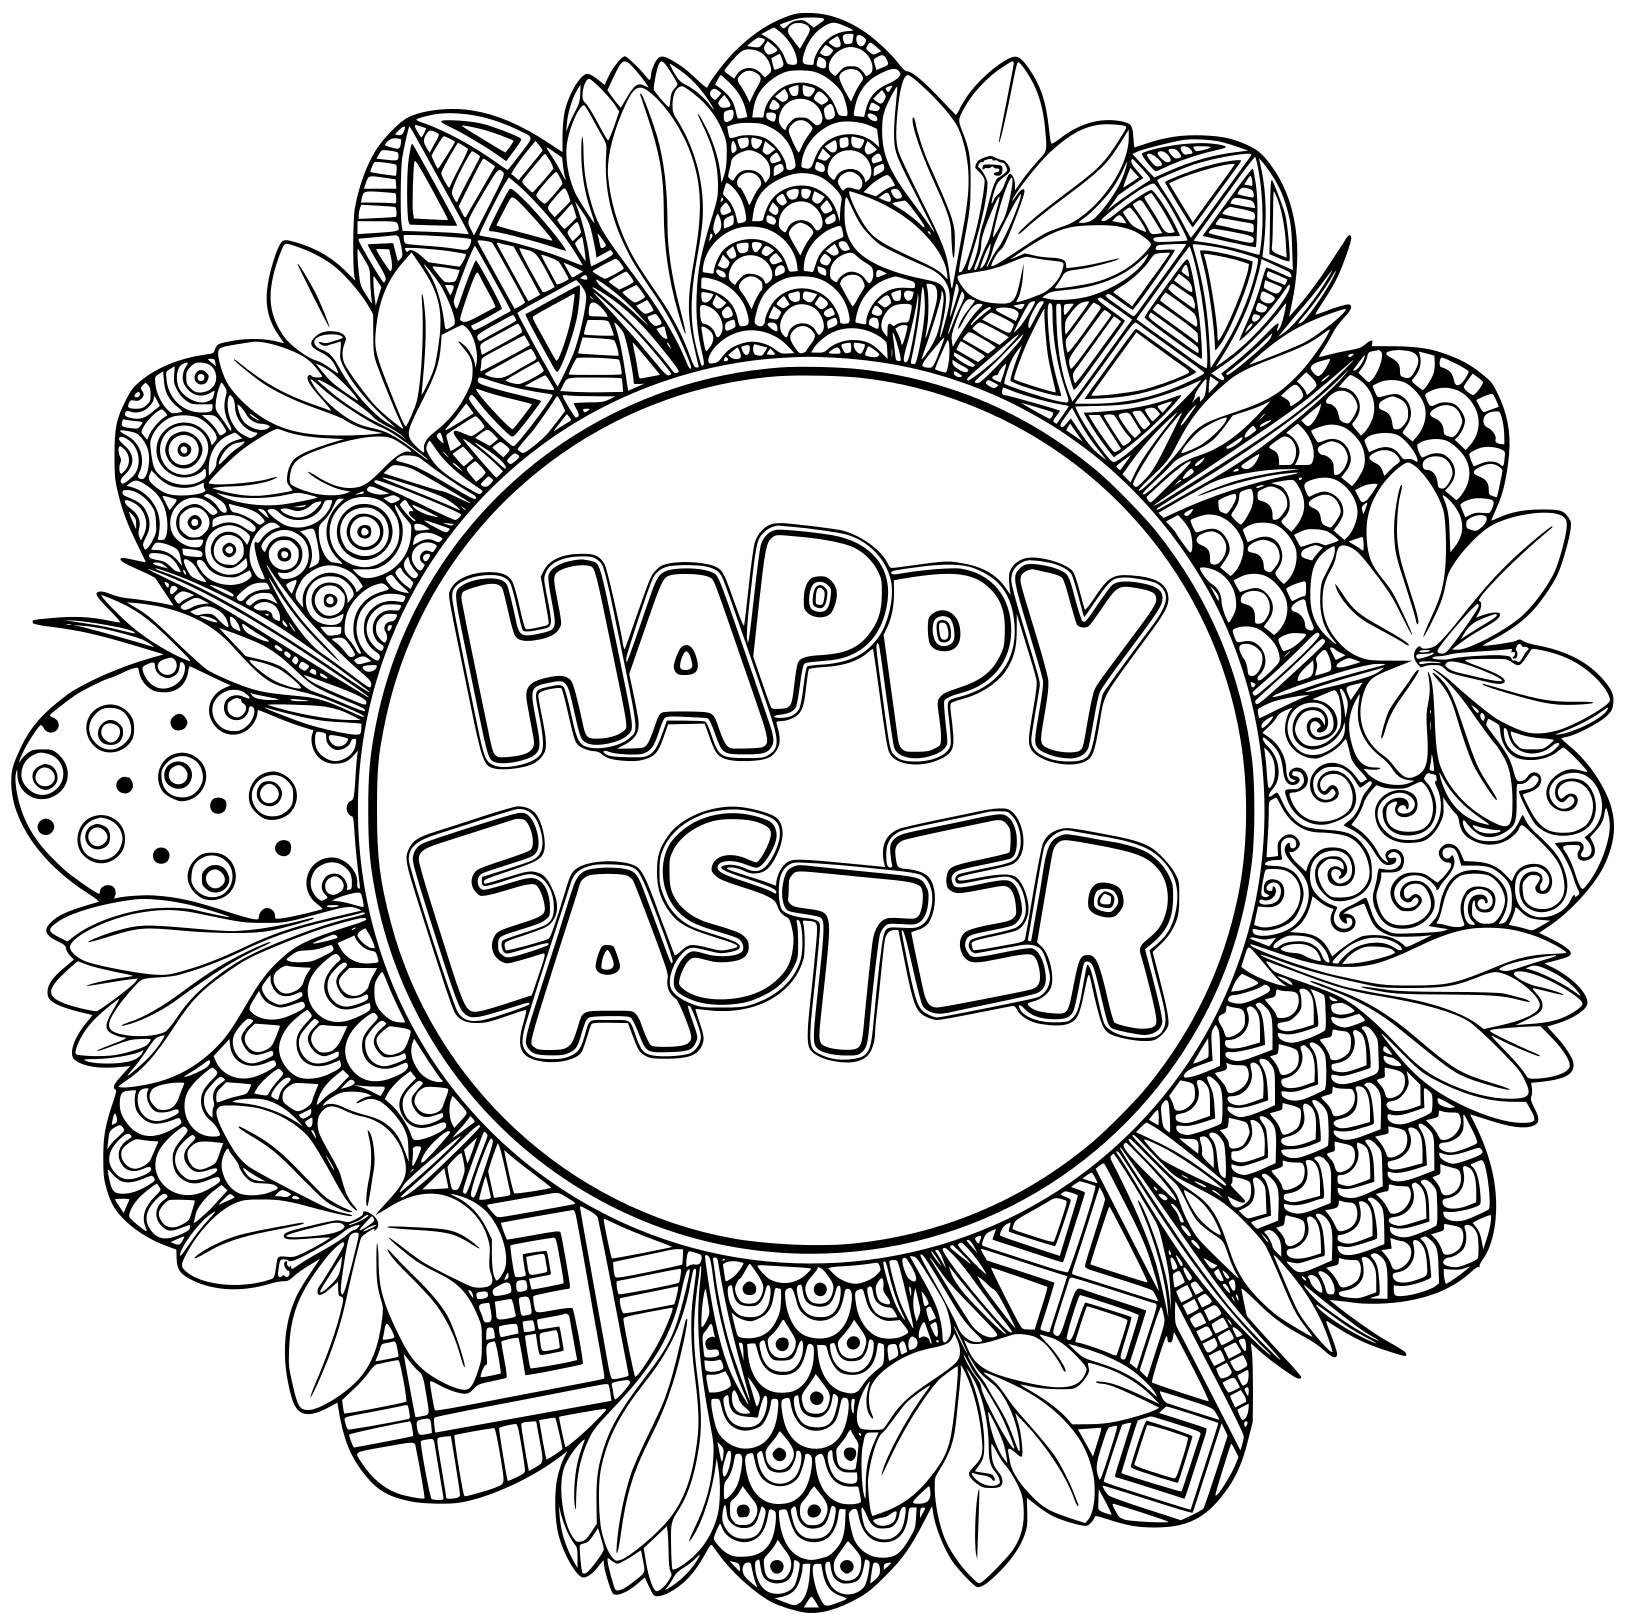 Happy Easter Easter Mandala Coloring Page